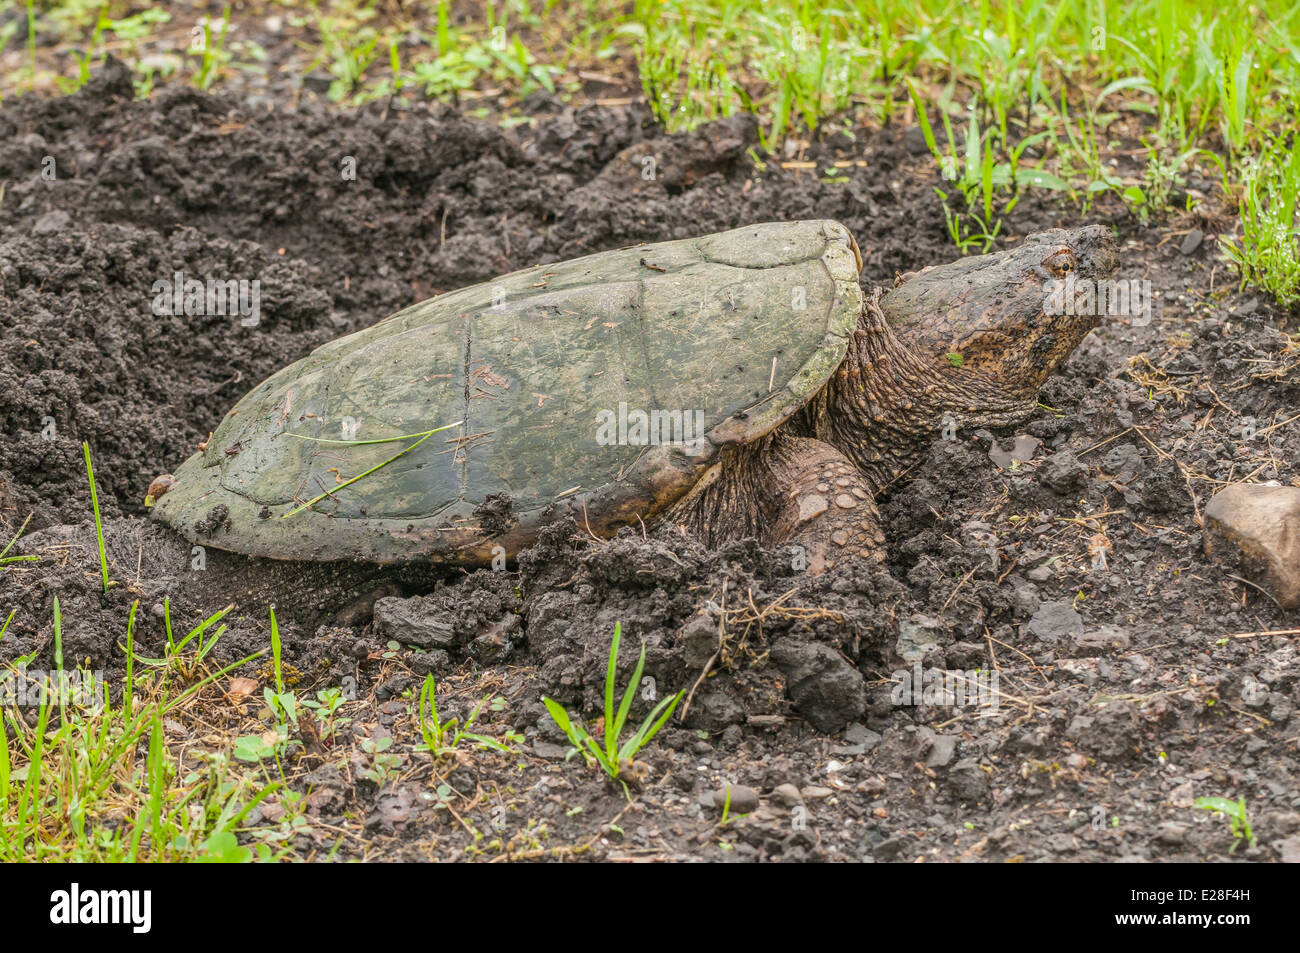 A snapping turtle laying eggs at the edge of a swamp. Stock Photo